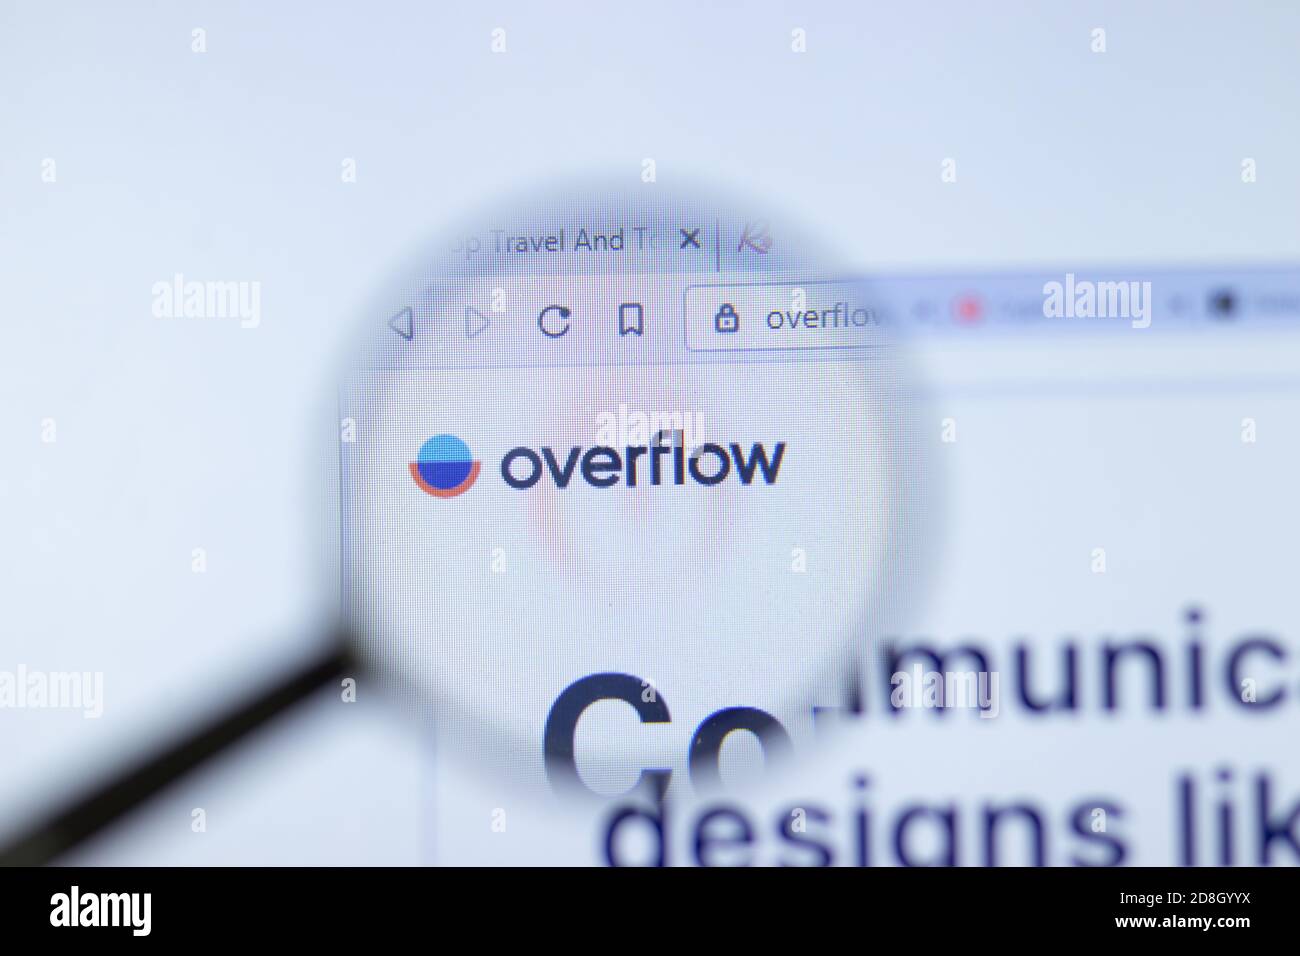 New York, USA - 26 October 2020: Overflow company website with logo close up, Illustrative Editorial Stock Photo